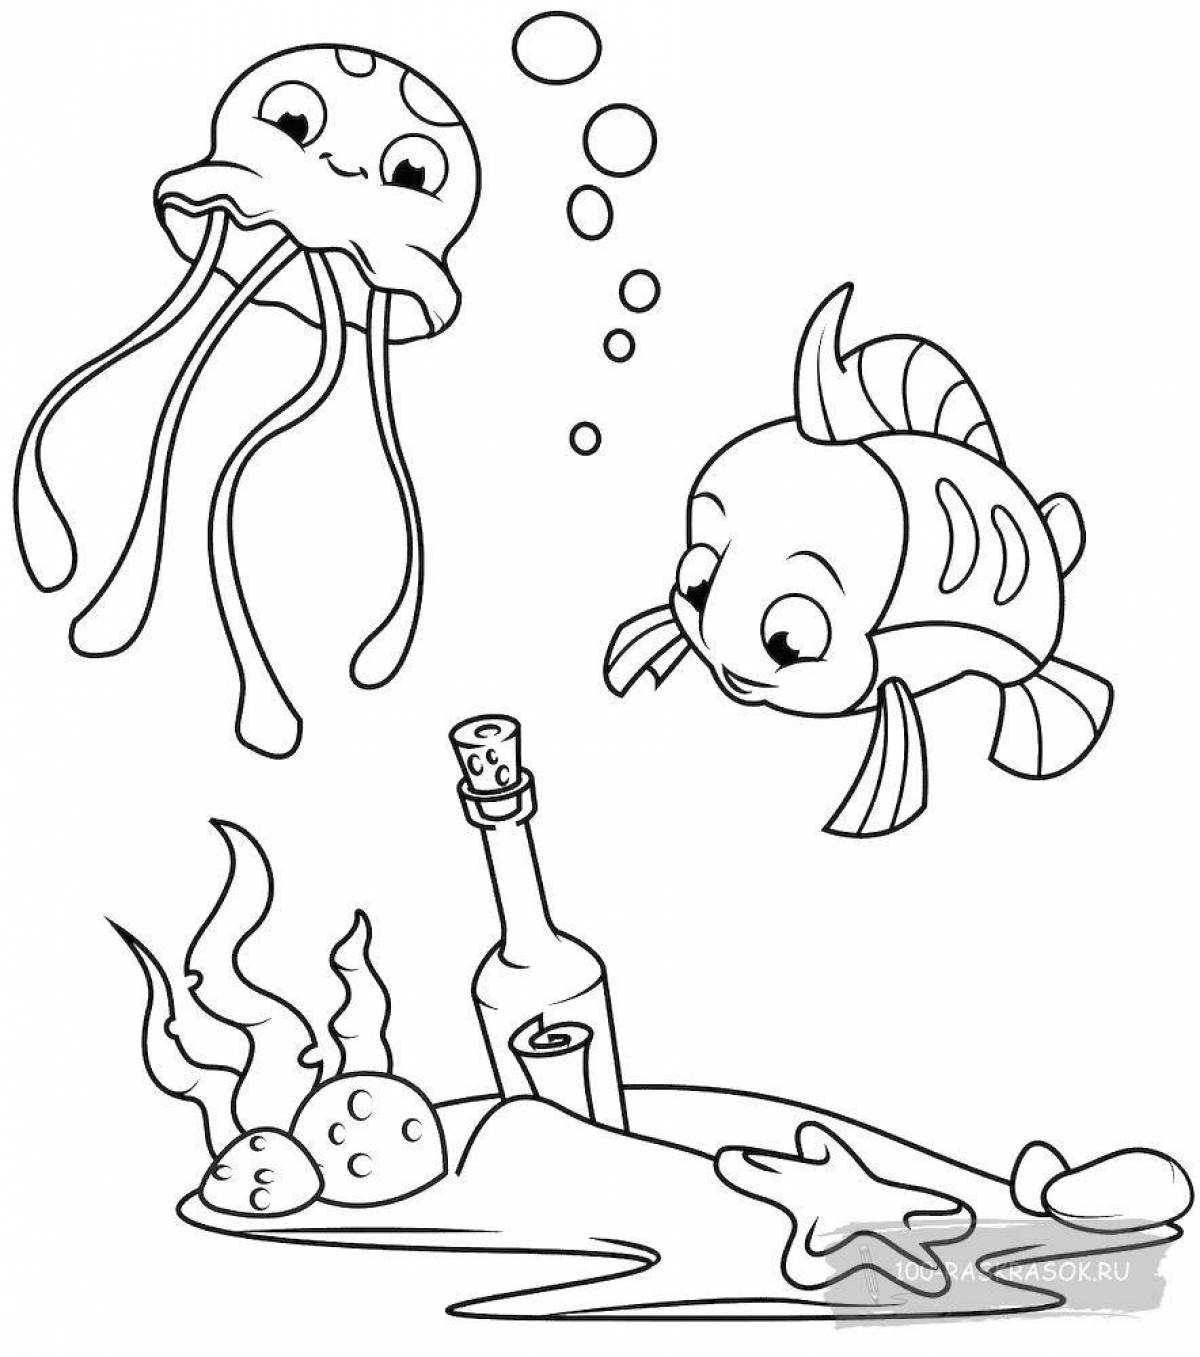 Glorious water world coloring page